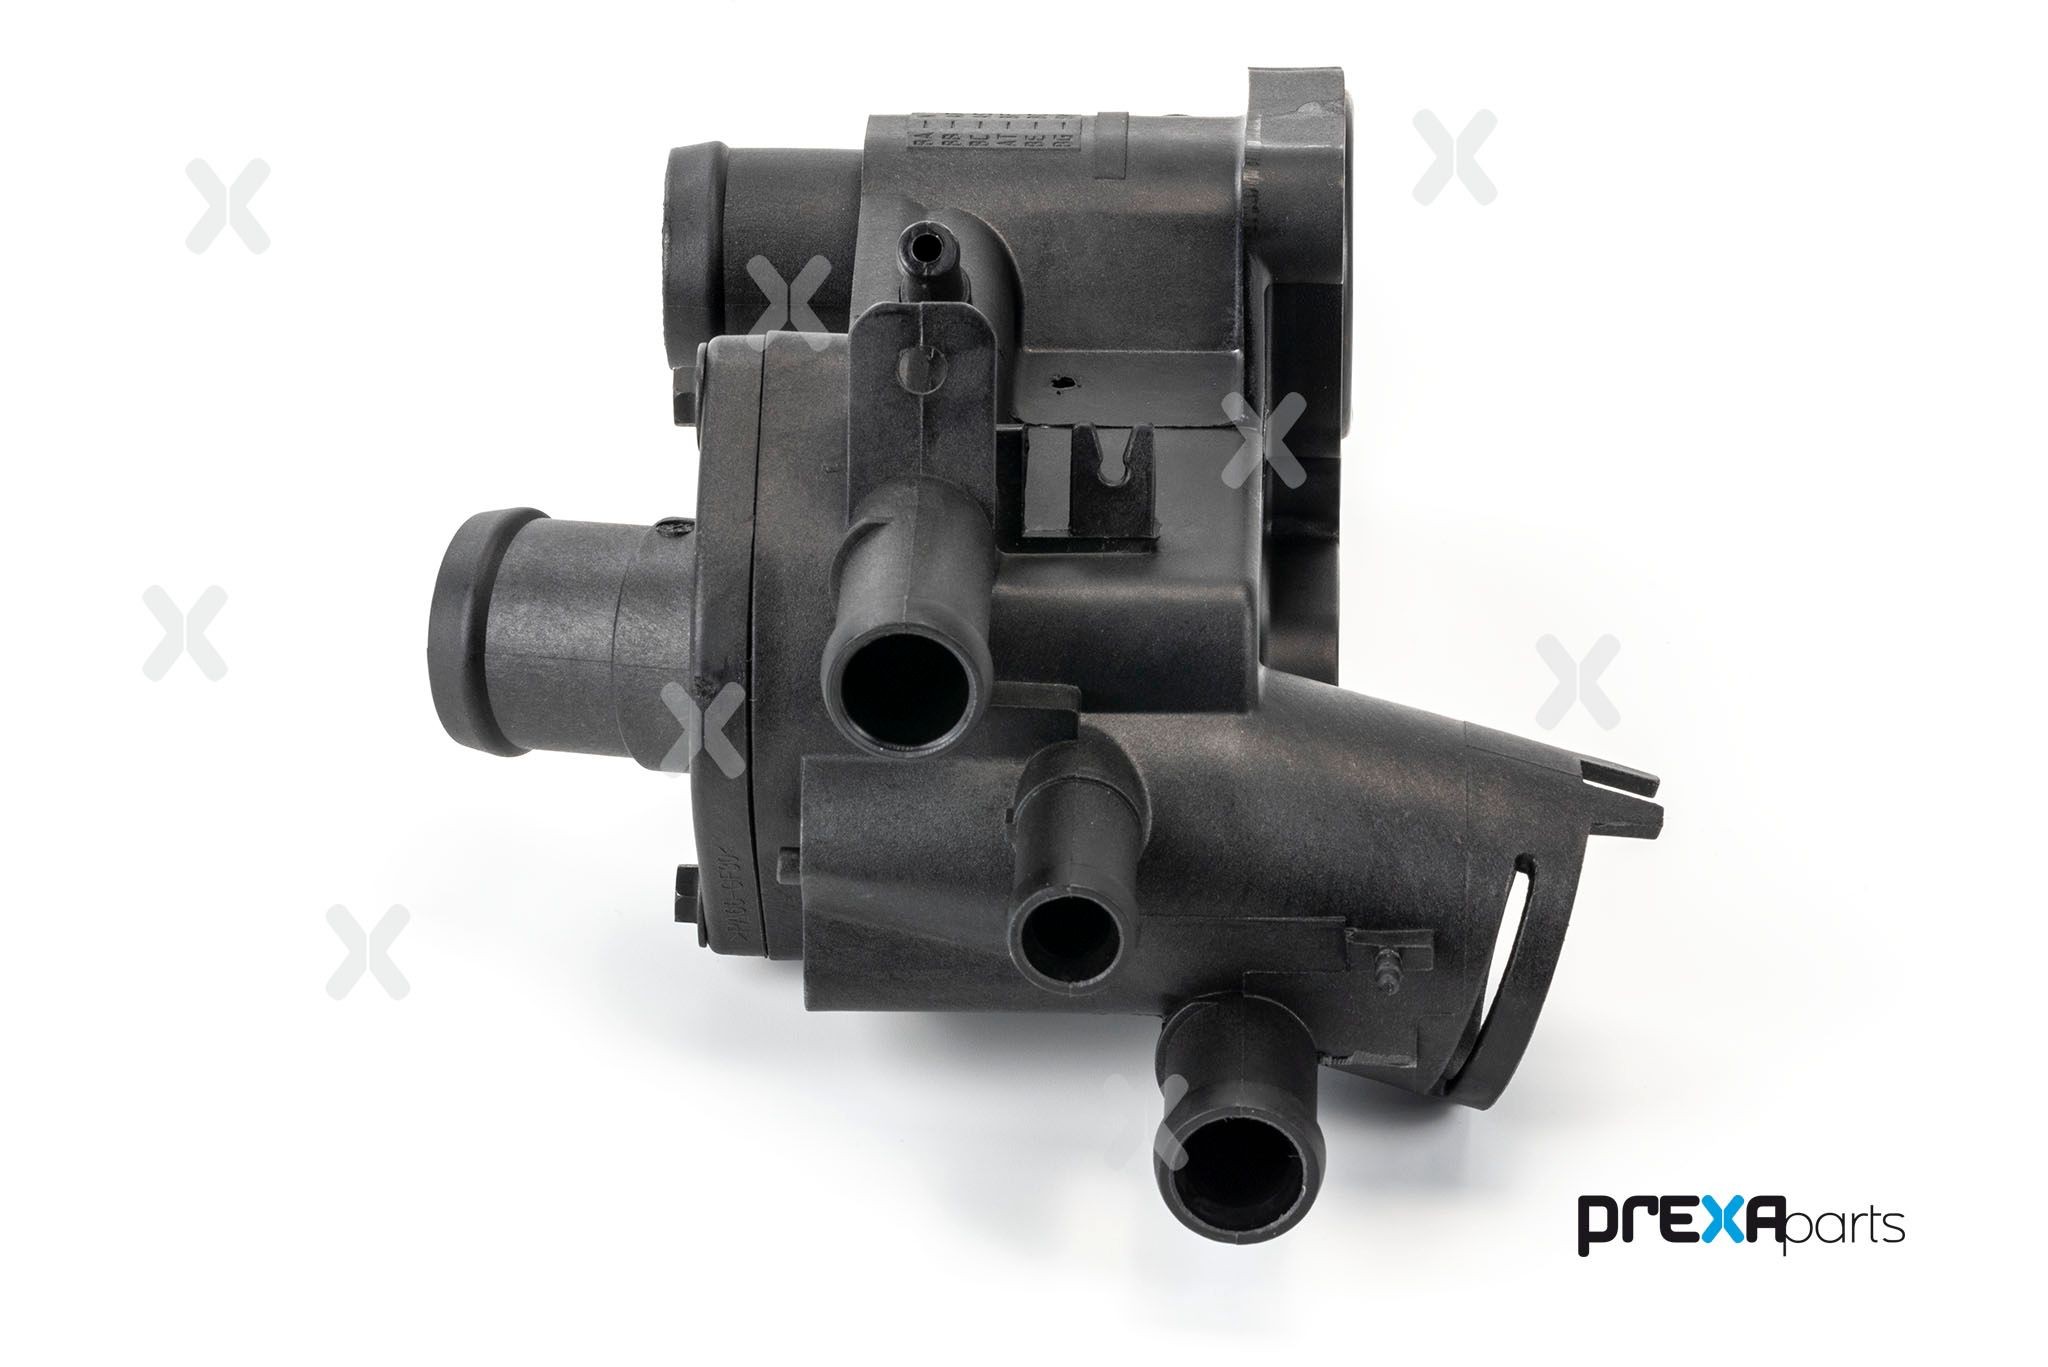 PREXAparts Thermostat Housing P107004 buy online